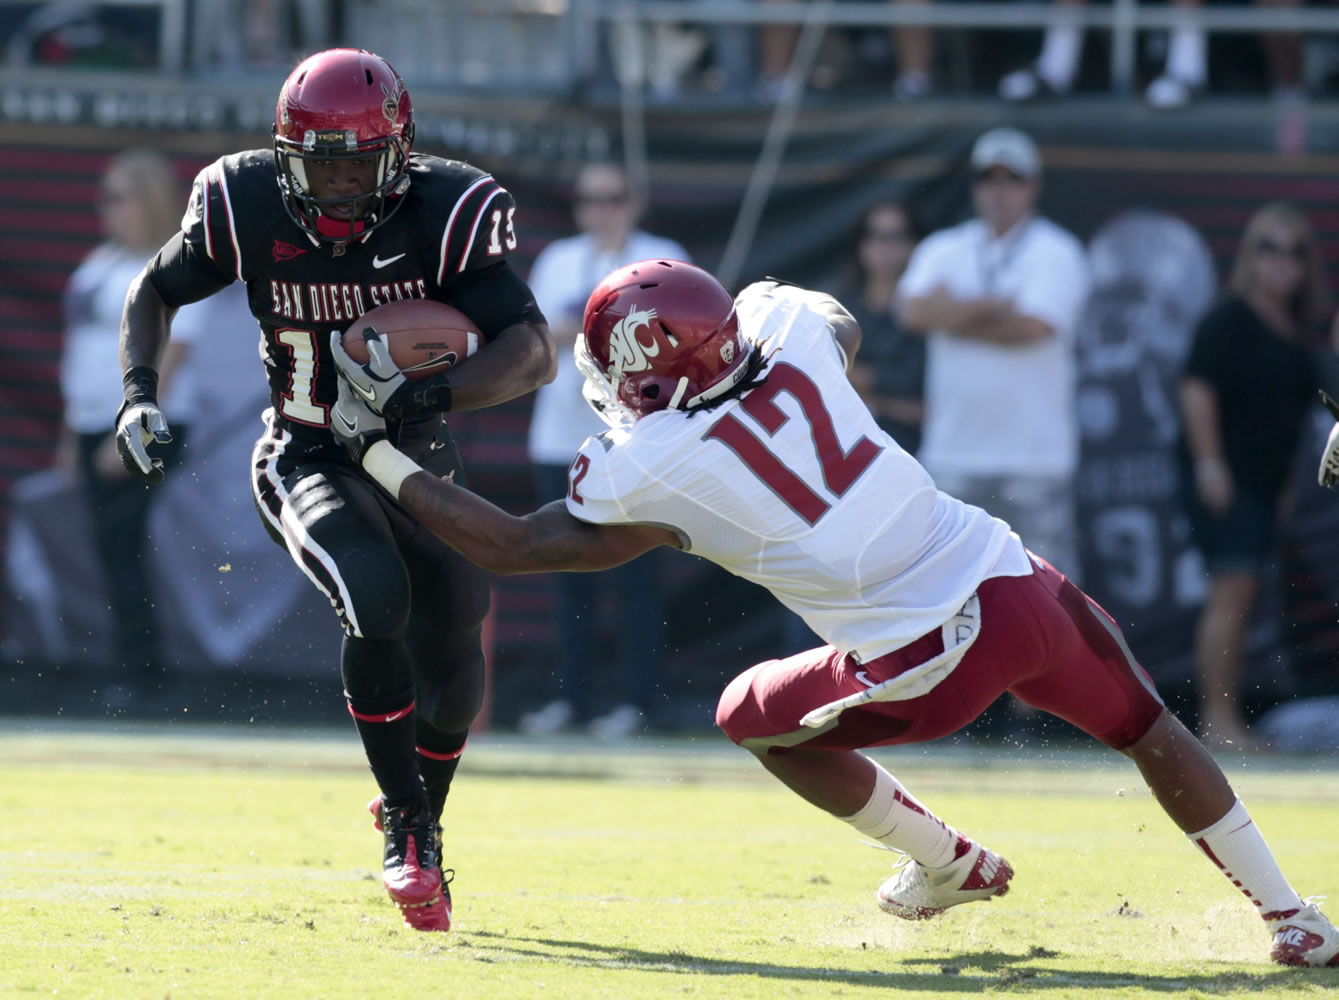 San Diego State running back Ronnie Hillman, left, gets past the tackle of Washington State's C.J.